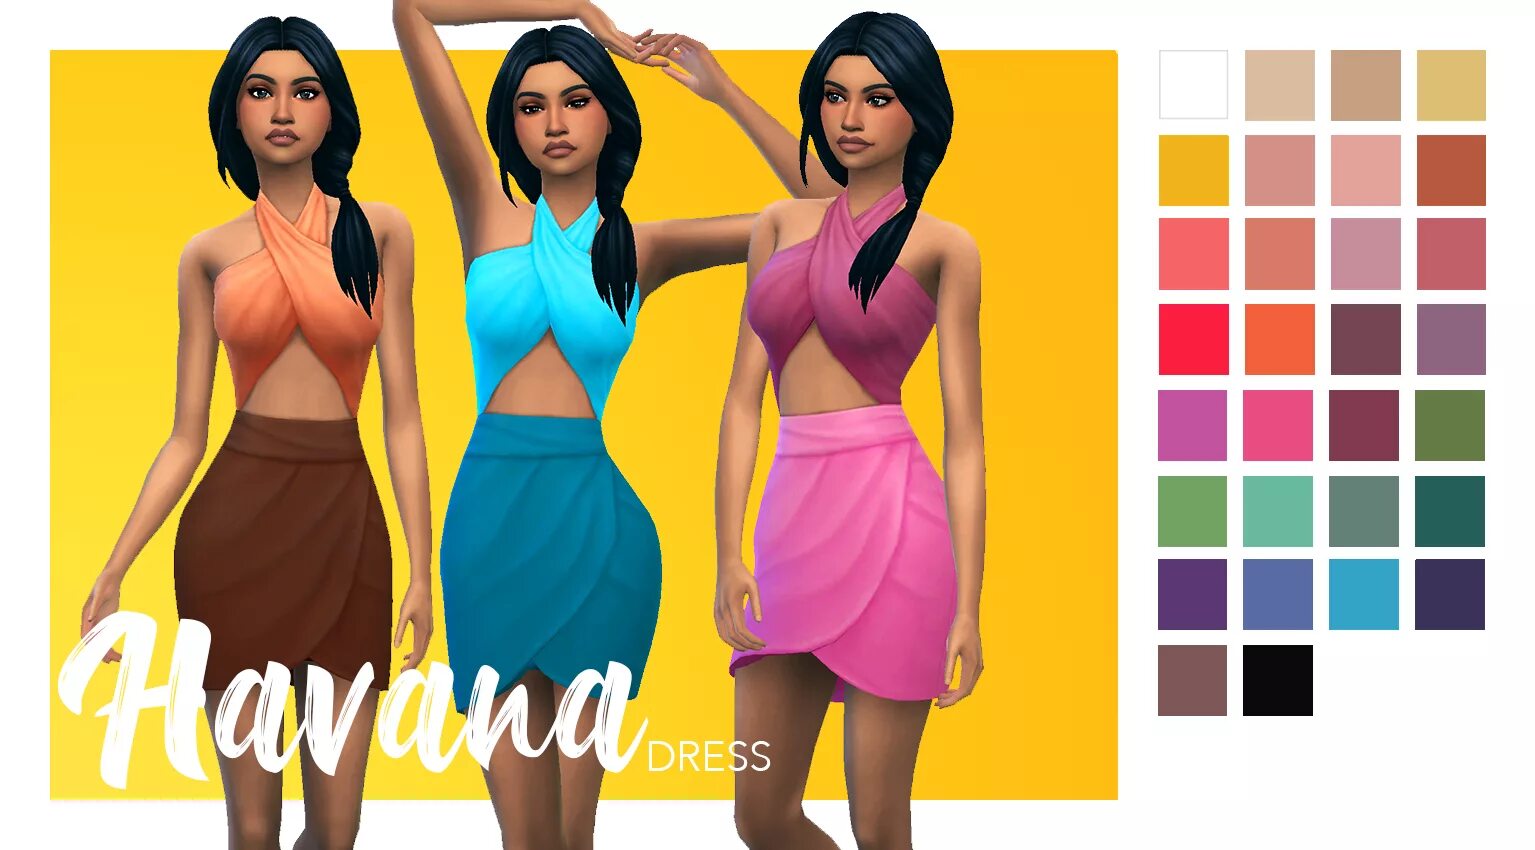 SIMS 4 Dress Maxis Match. SIMS 4 Witch Dress Maxis Match. Симс 4 мод Maxis Match Dress. SIMS 4 Maxis Match Sulani clothes. Моды maxis